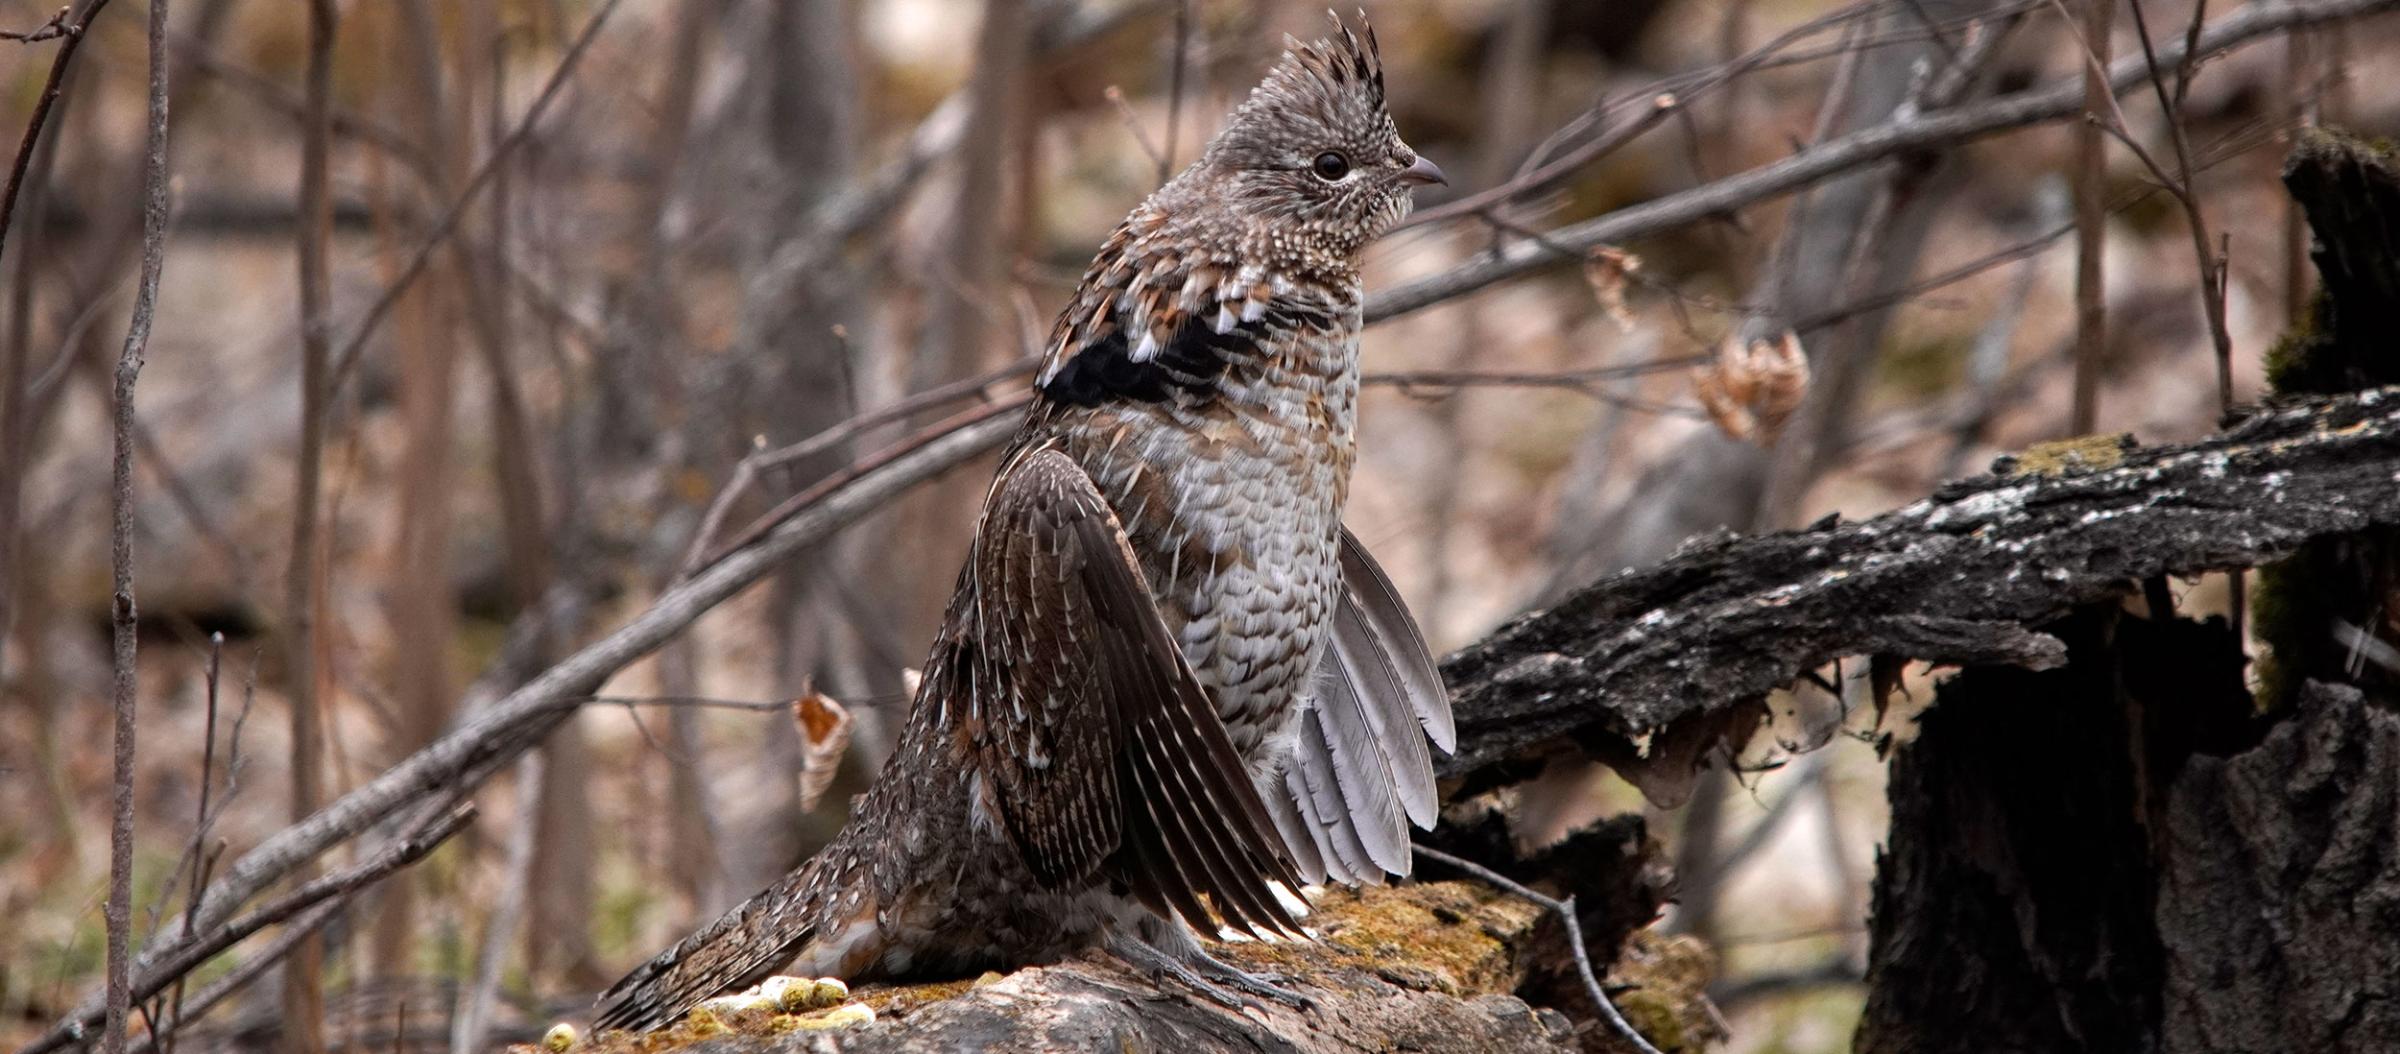 Ruffed grouse on log in forest drumming